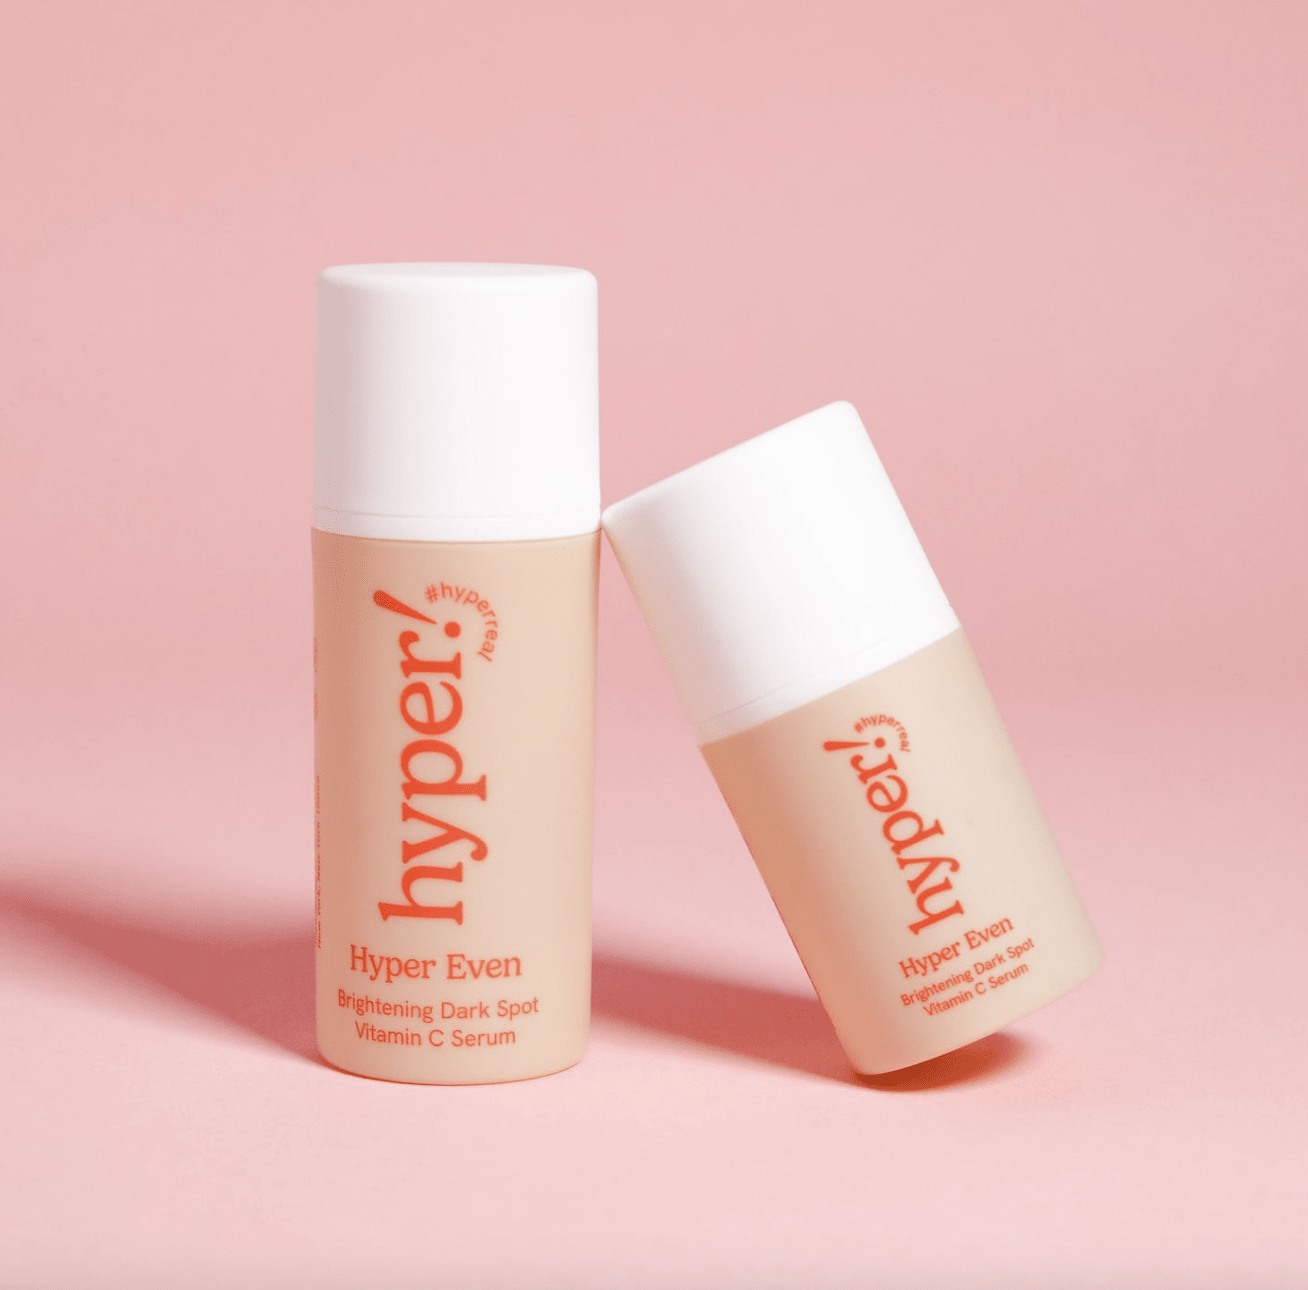 35 Latinx-Owned Beauty Brands You Need to Try Right Away